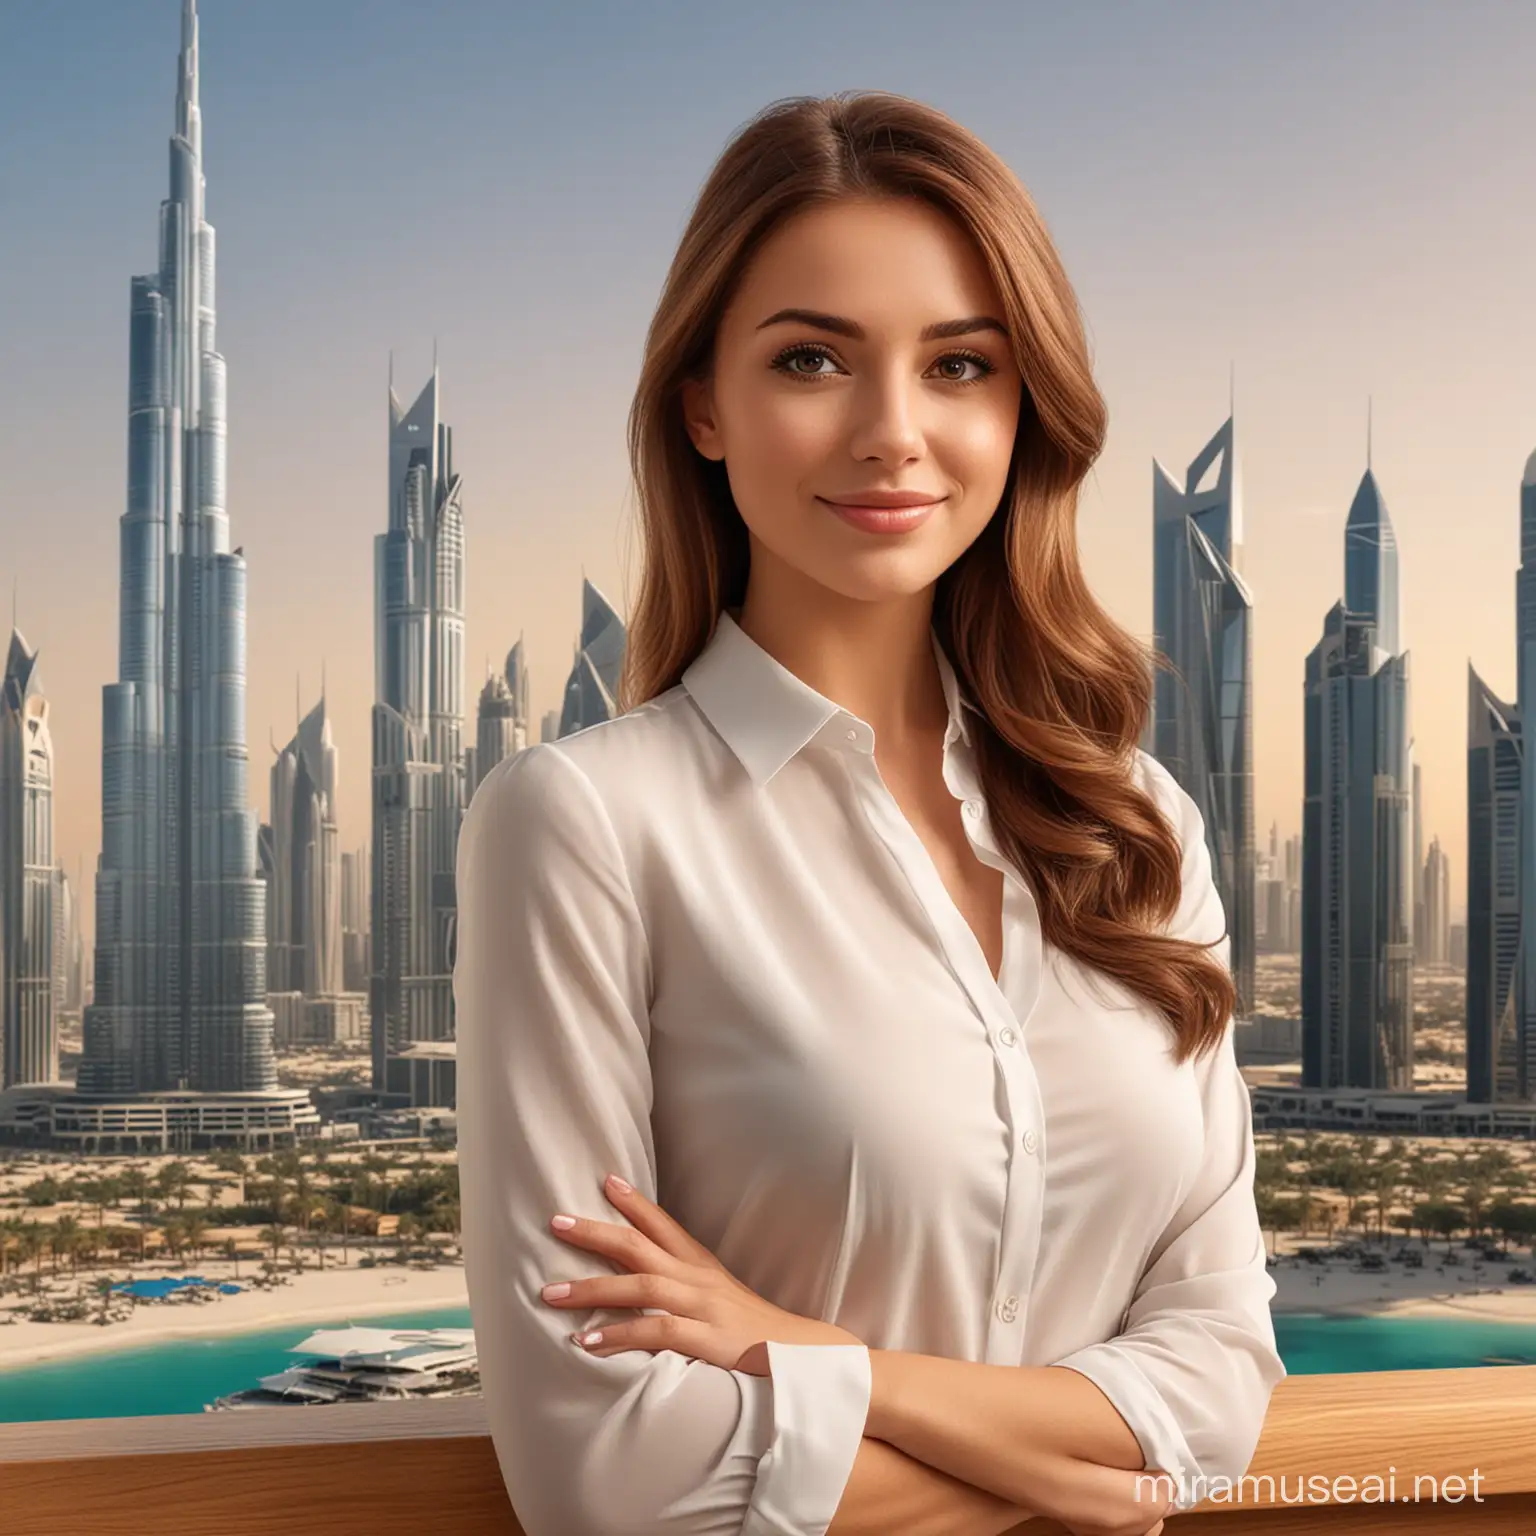 Cute BrownHaired Real Estate Agent in Dubai